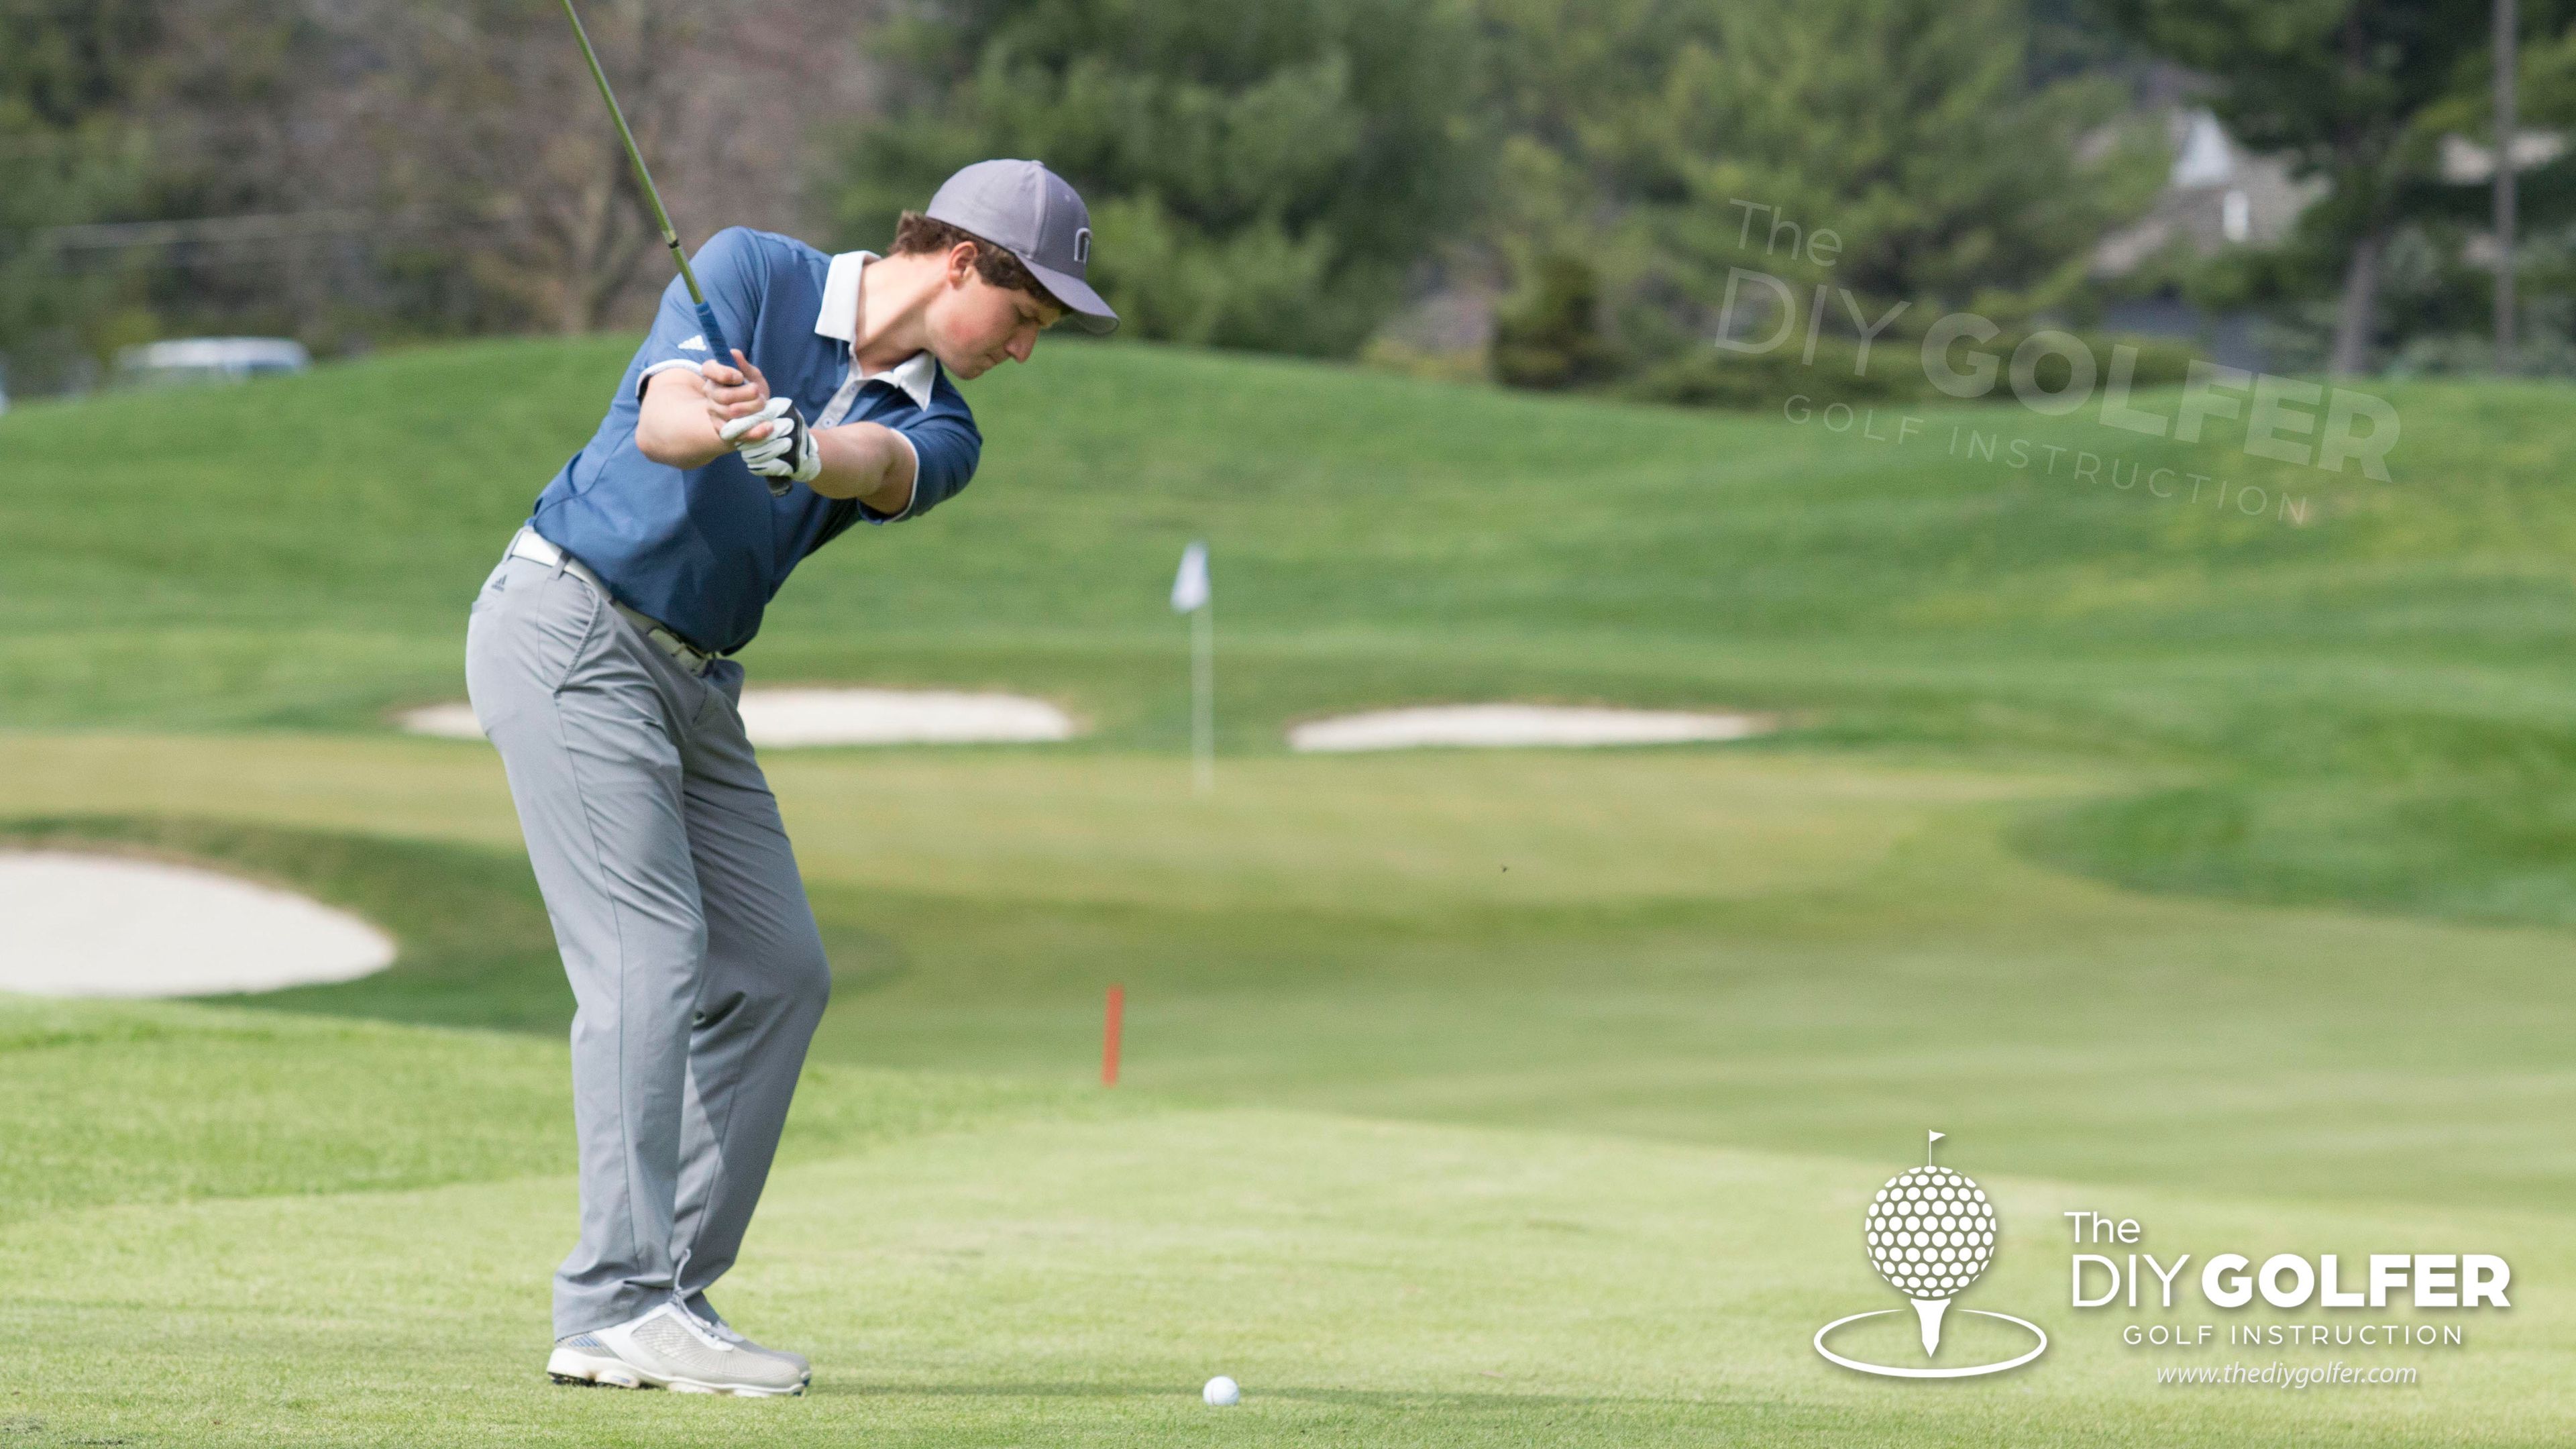 Want to get better? Practice your impact position - National Club Golfer